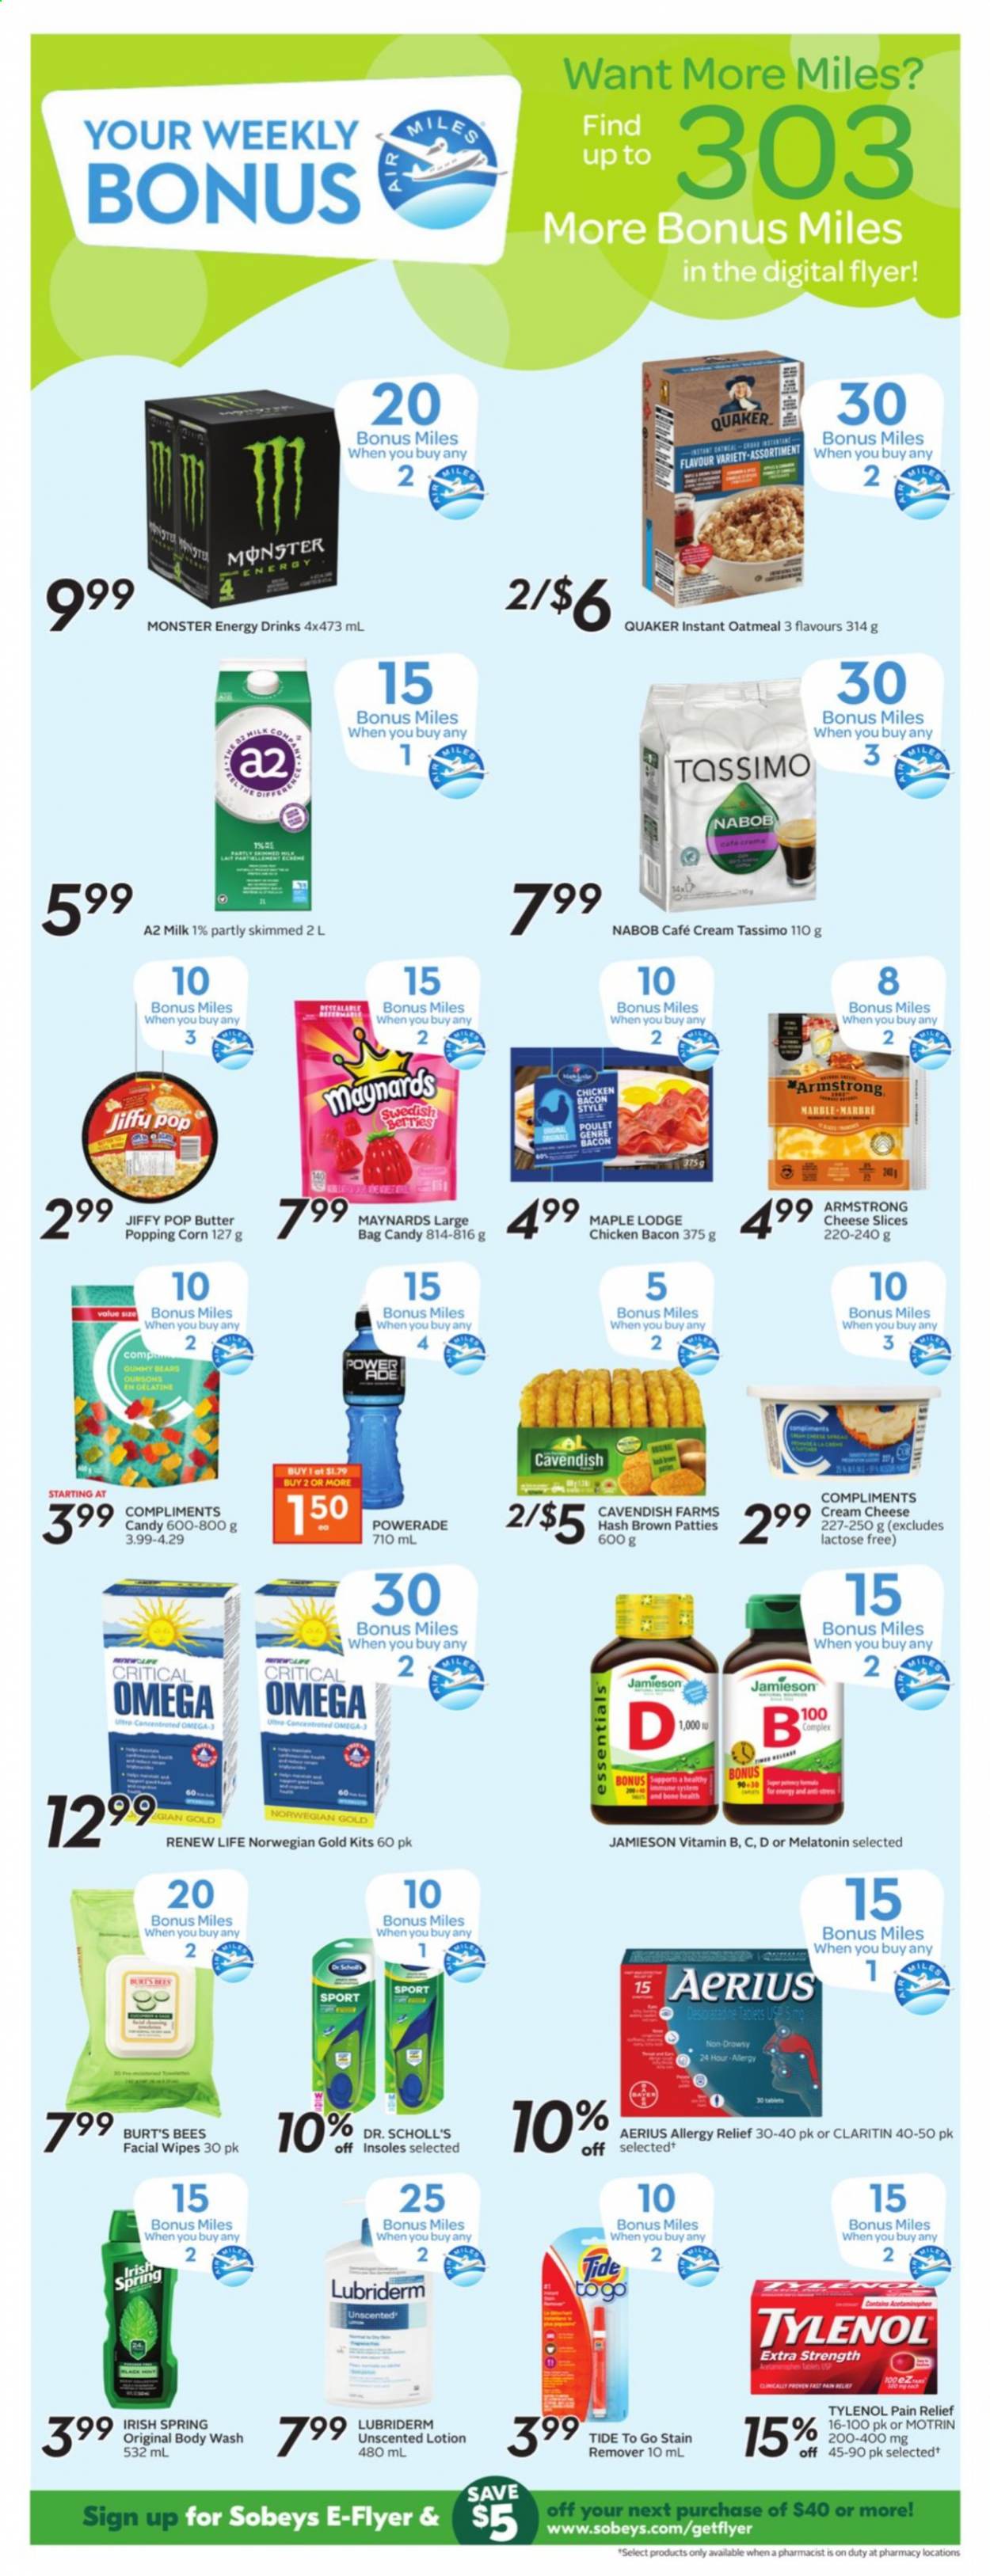 thumbnail - Sobeys Flyer - May 27, 2021 - June 02, 2021 - Sales products - corn, Quaker, bacon, cream cheese, sliced cheese, cheese, milk, butter, oatmeal, Powerade, energy drink, Monster, Monster Energy, wipes, stain remover, Tide, body wash, body lotion, Lubriderm, bag, pain relief, Melatonin, Tylenol, allergy relief, Motrin, Dr. Scholl's. Page 12.